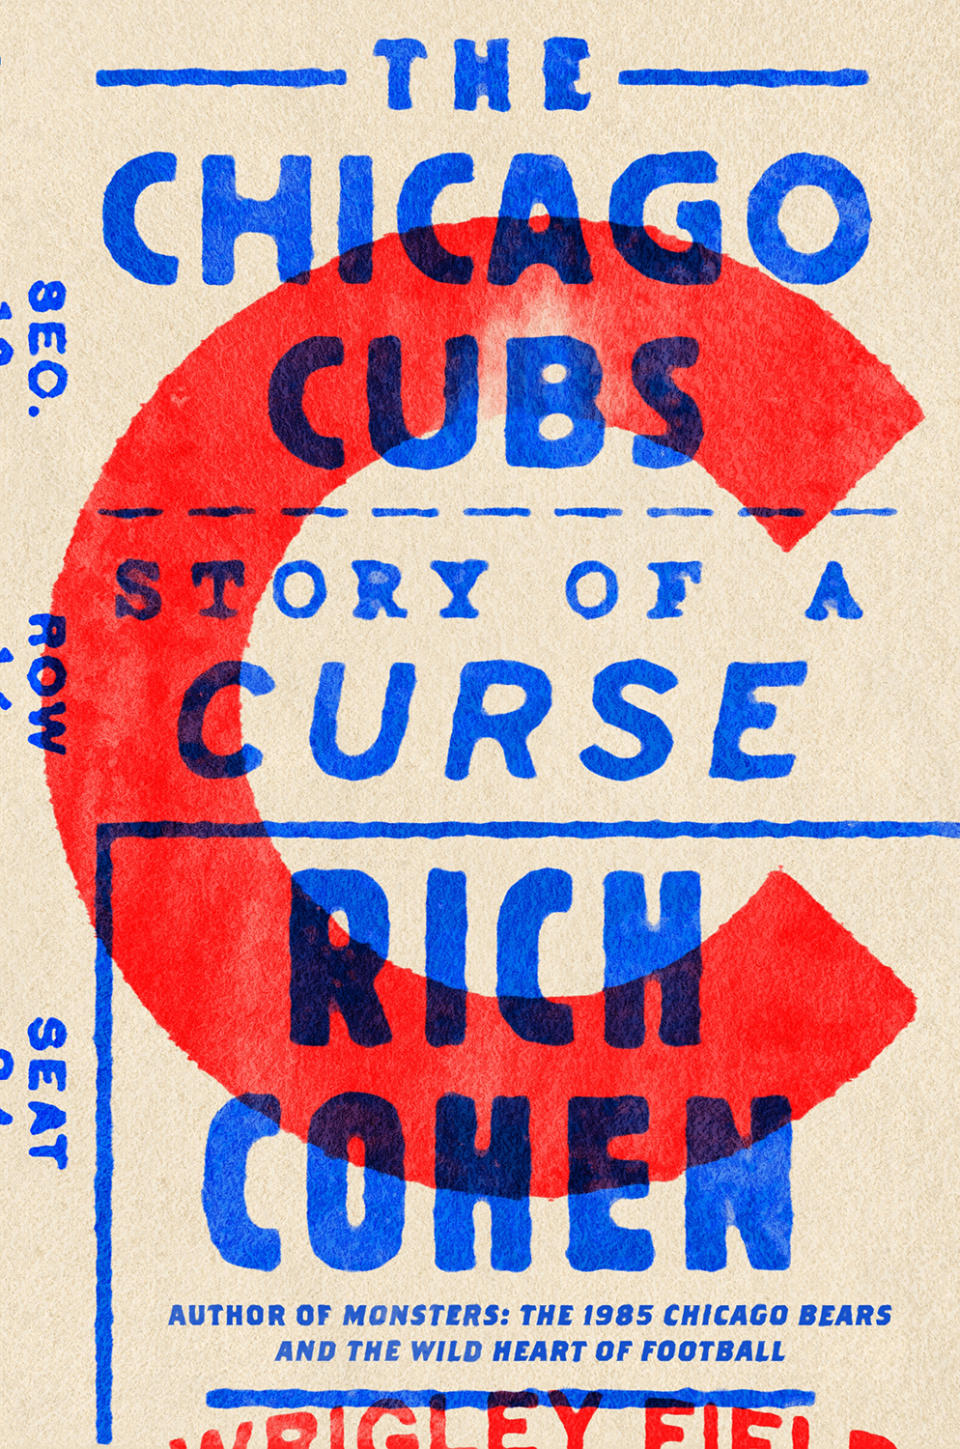 “The Chicago Cubs: Story of a Curse”